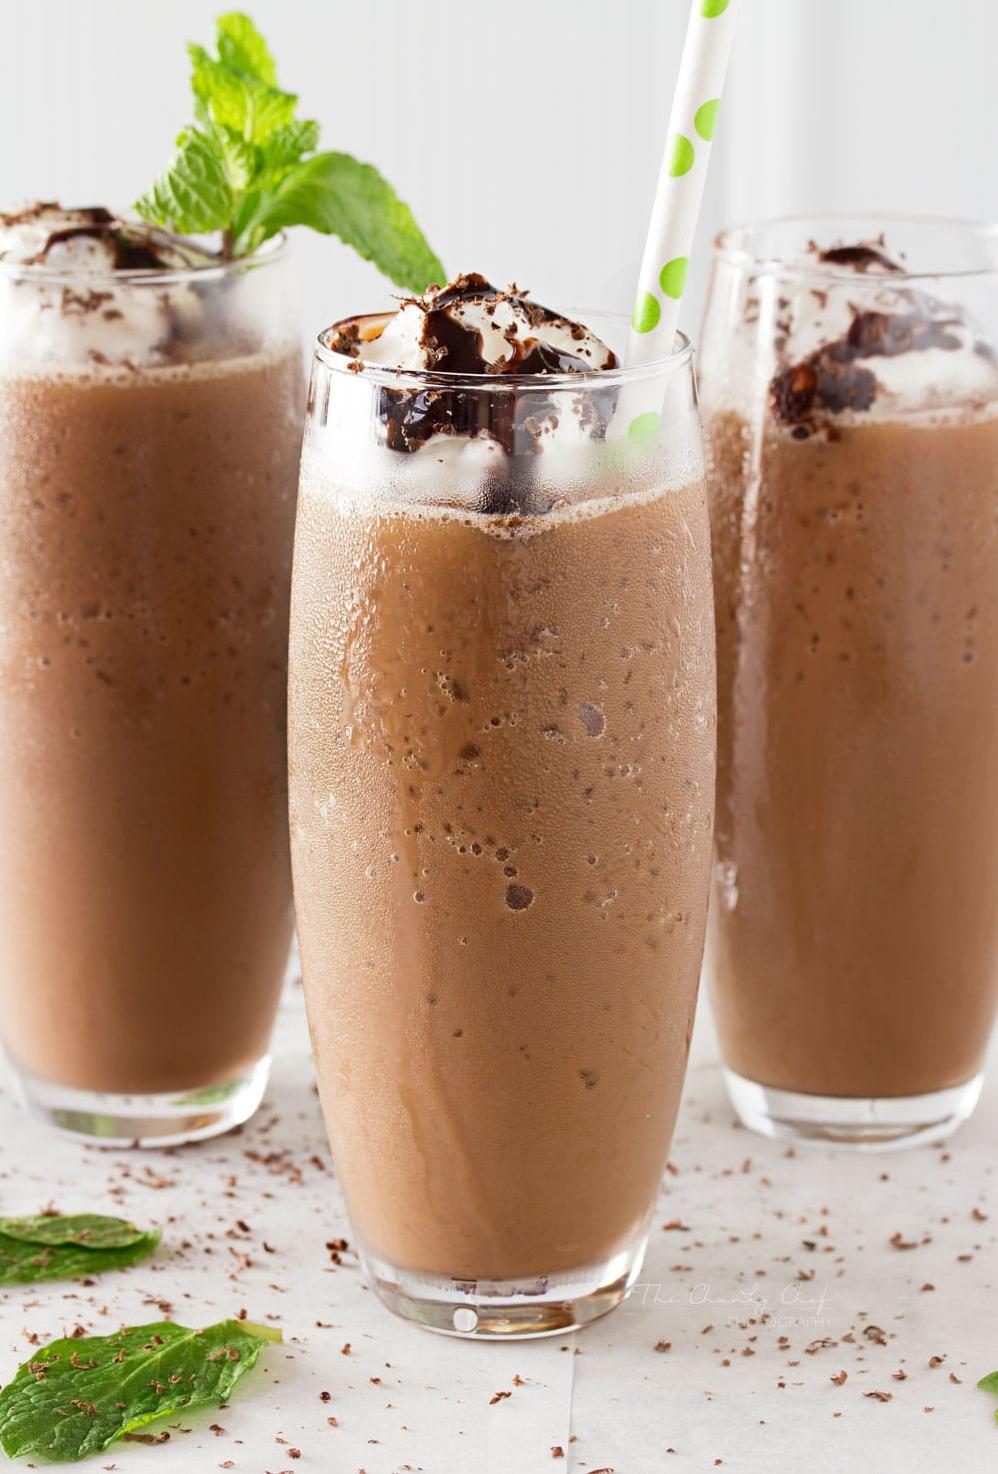  Get ready to indulge in a rich and creamy blend of coffee and chocolate flavors.